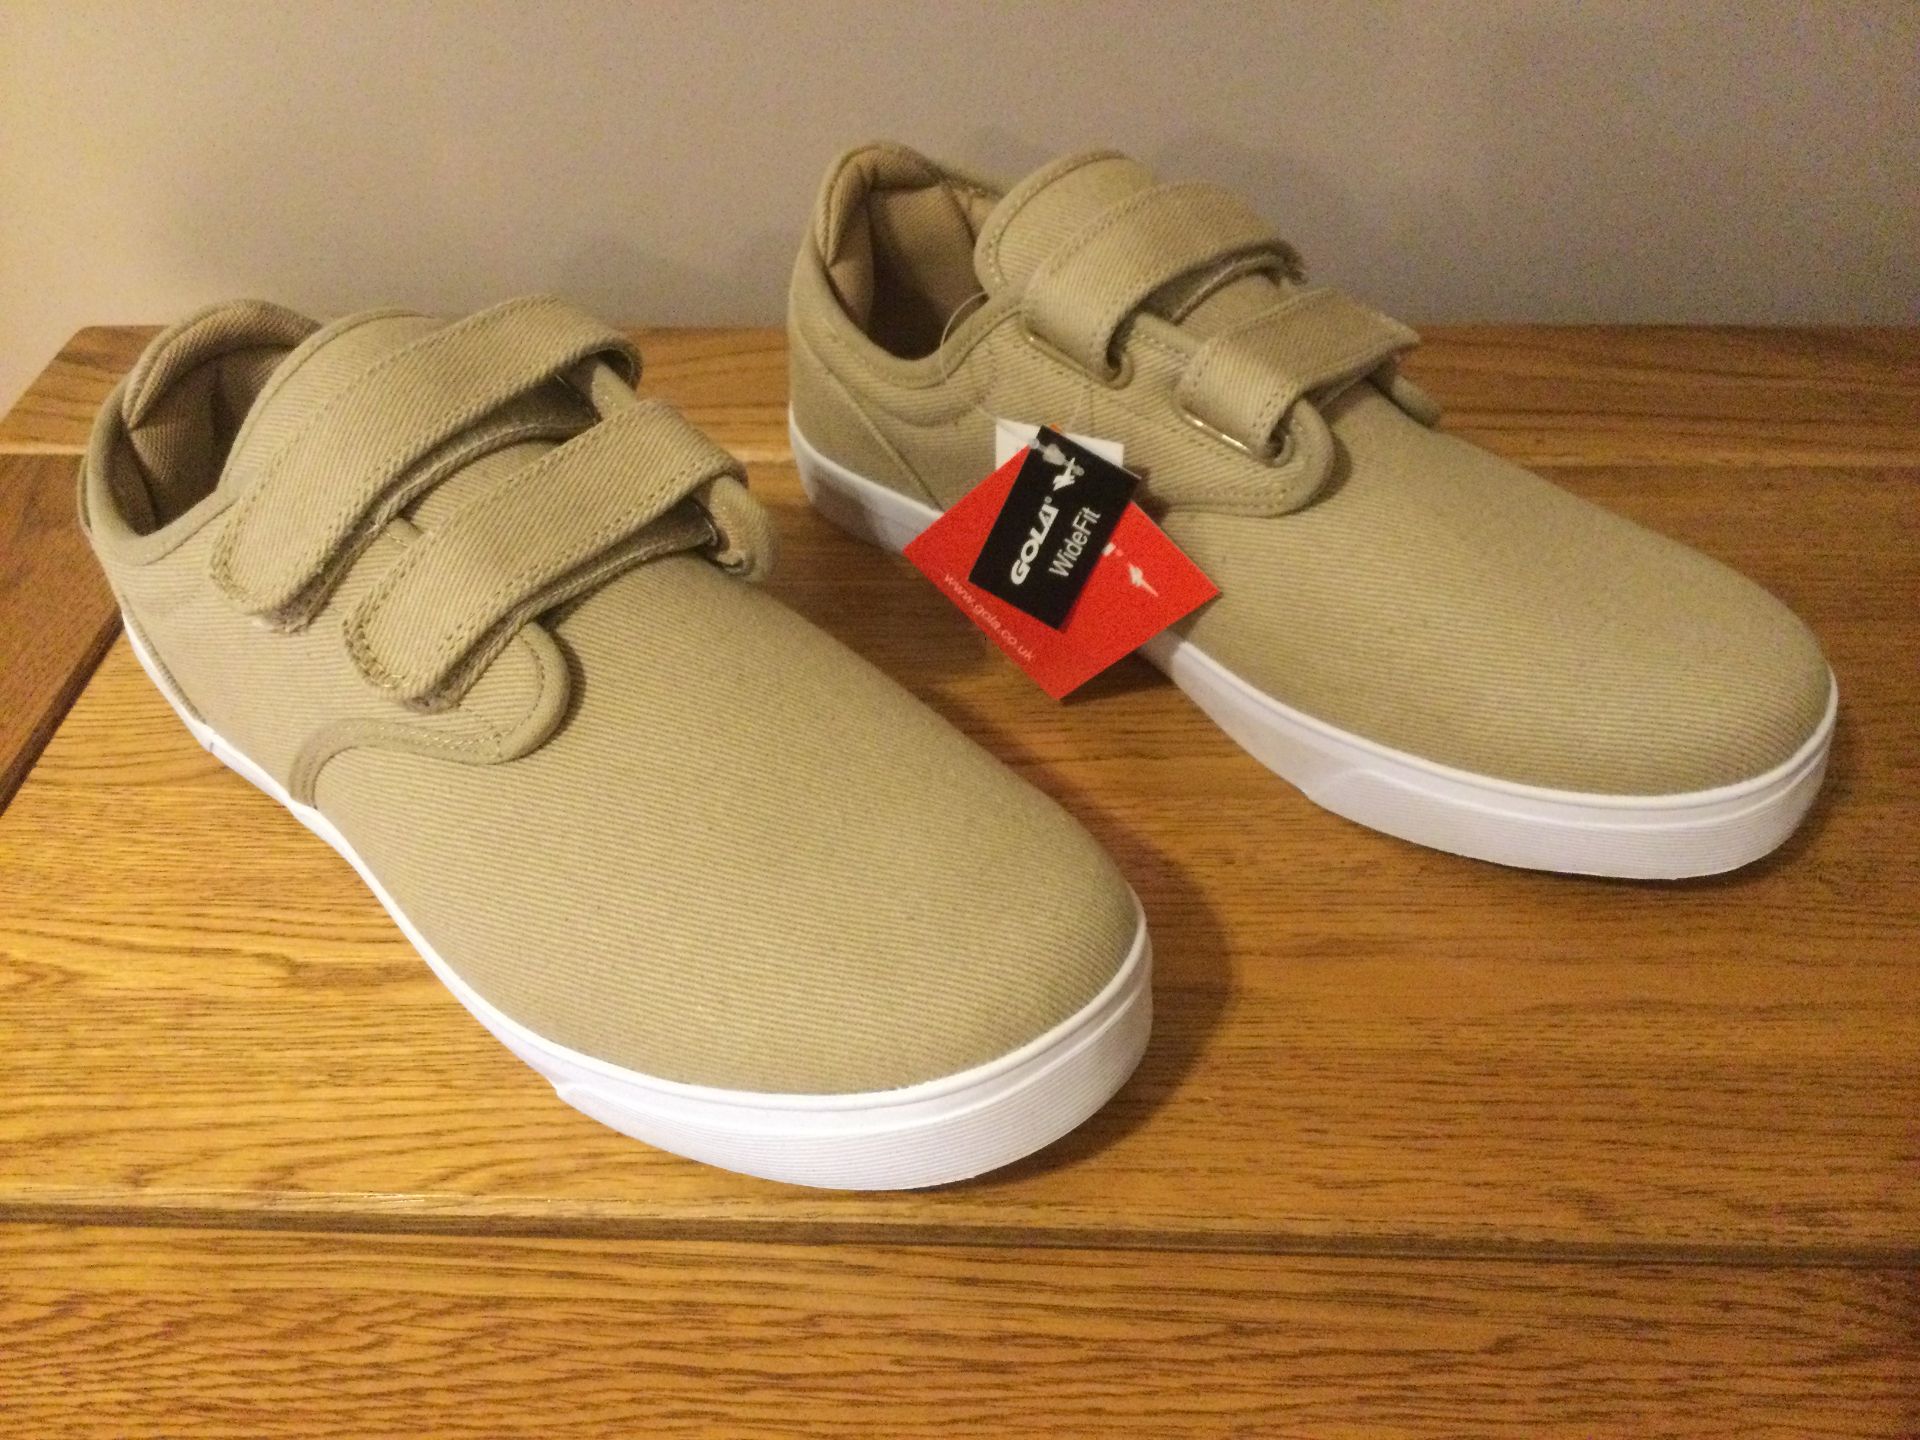 Gola “Panama” QF Men's Wide Fit Trainers, Size 10, Taupe/White - New RRP £36.00 - Image 3 of 5